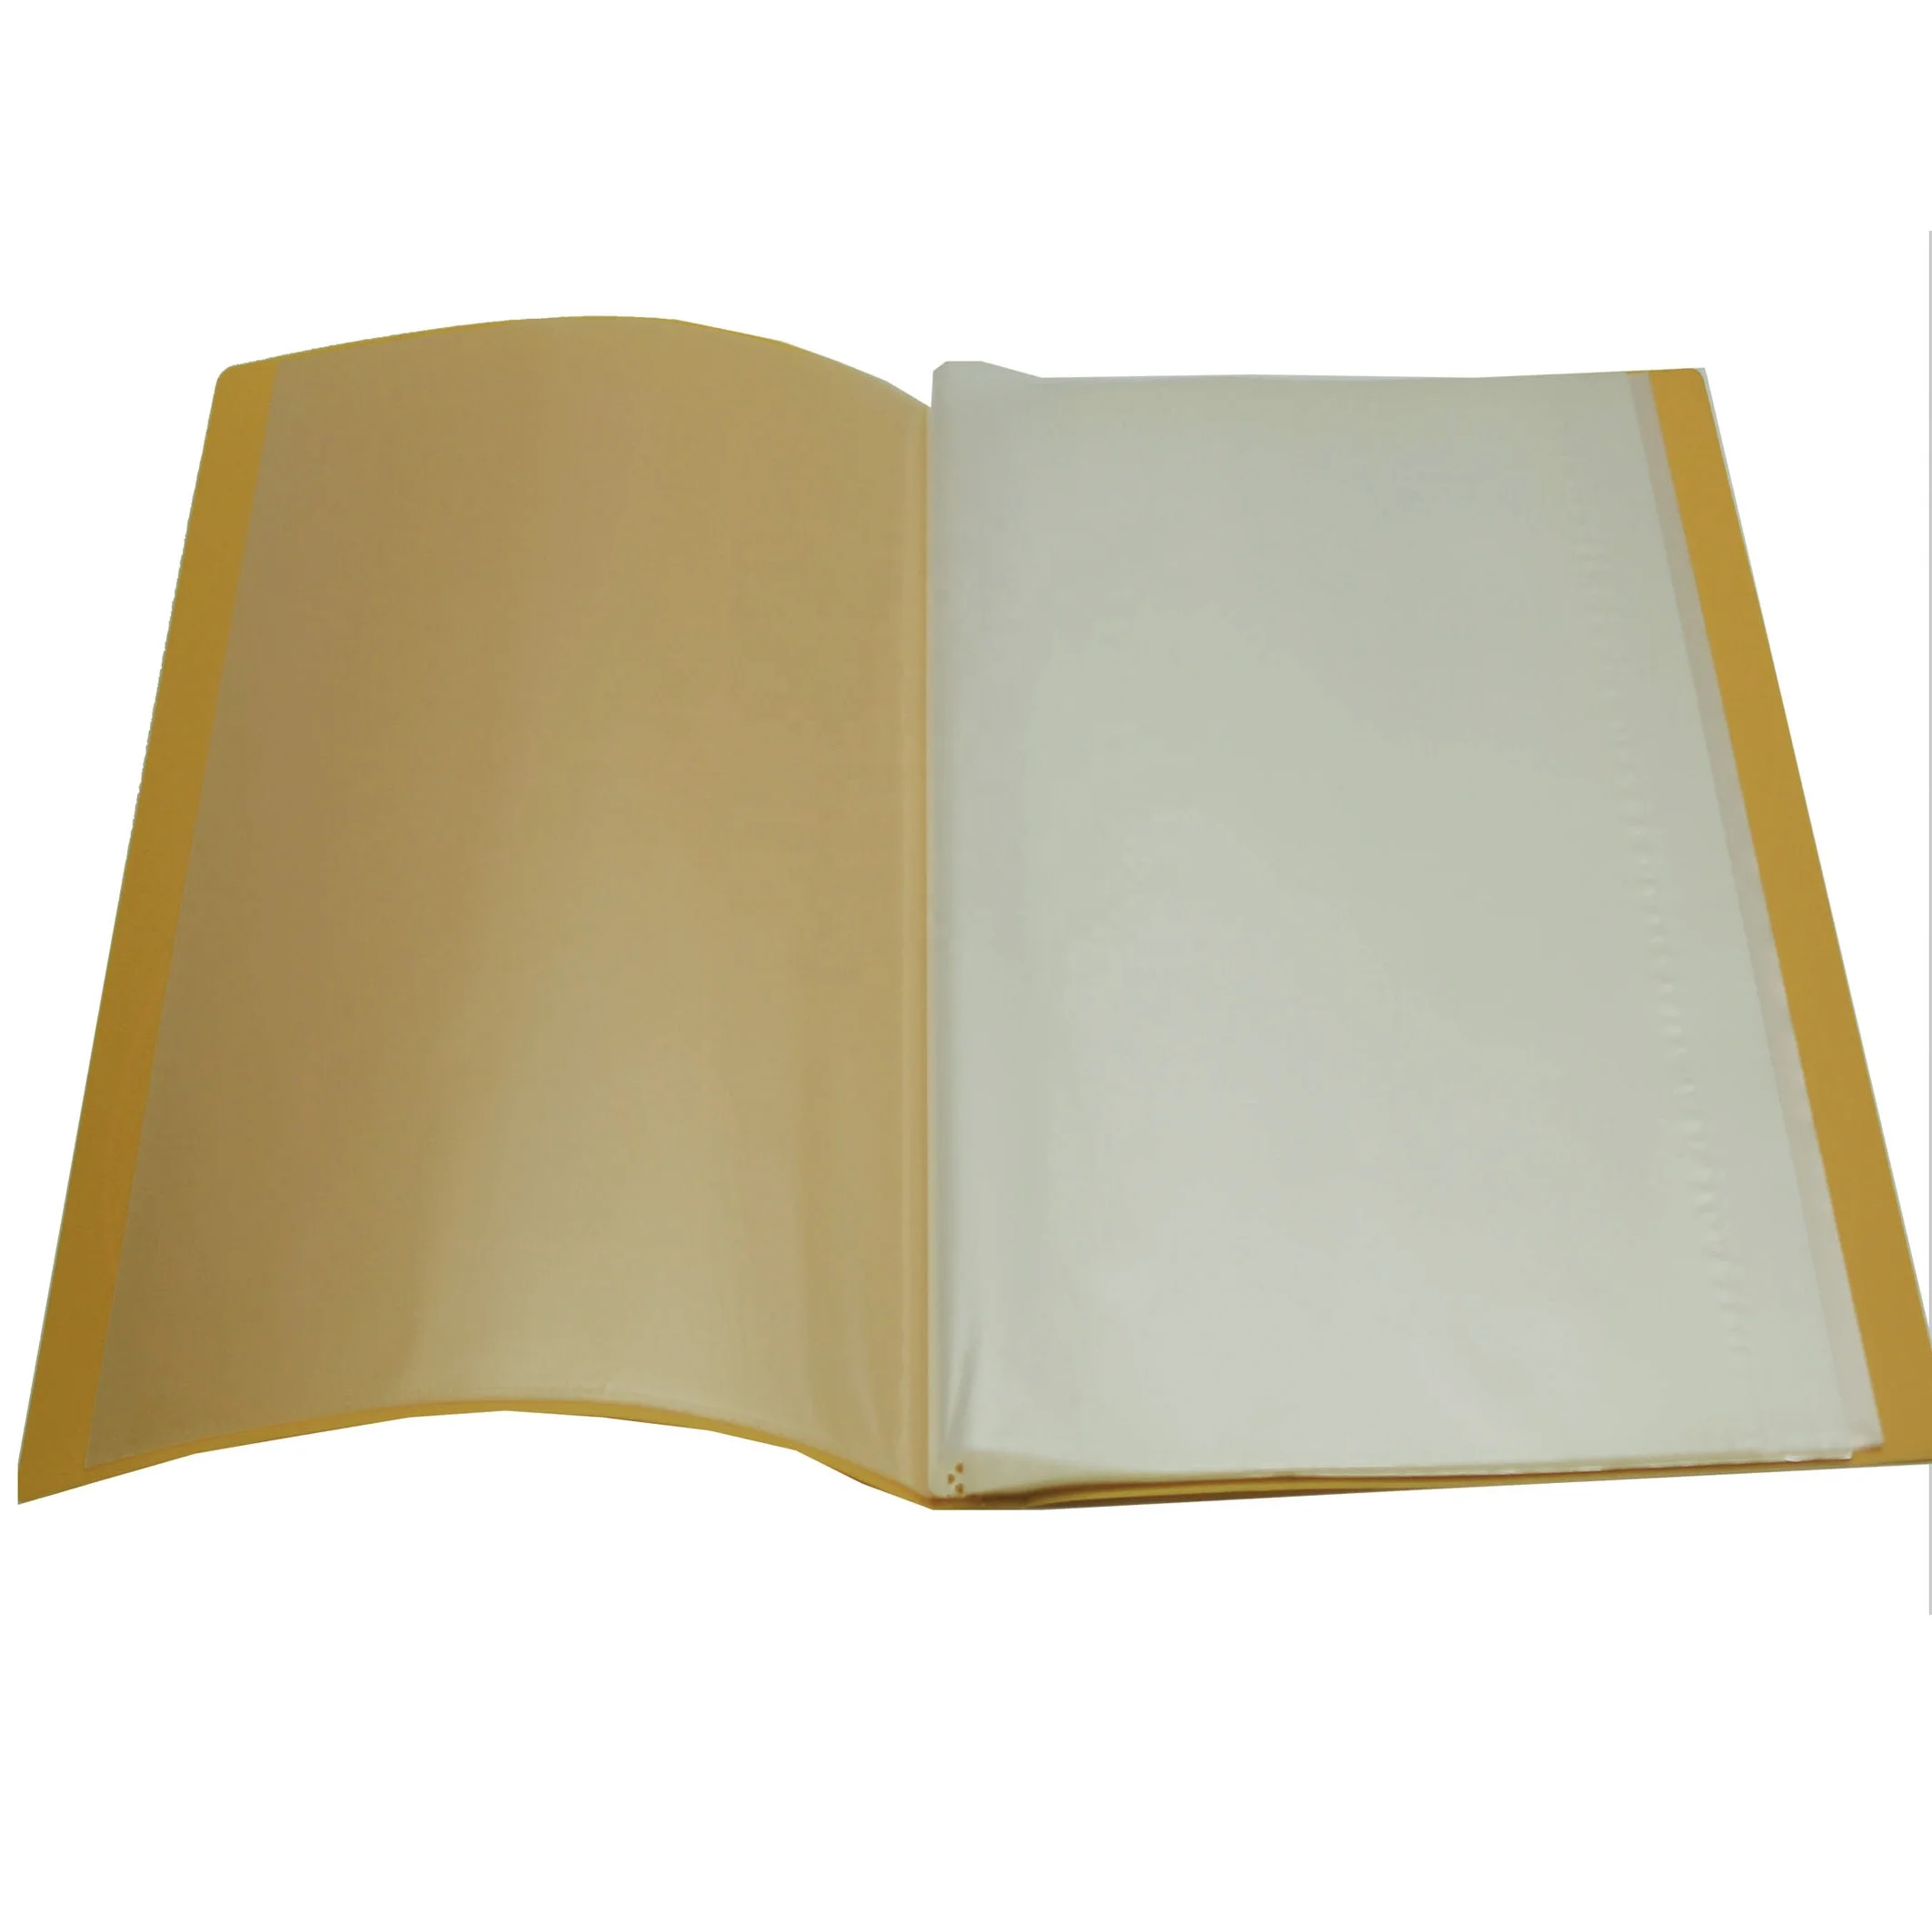 Custom Plastic File Folder Display Book with 10/20/30/40/60/80 Clear Pocket  - China Office, Envelope